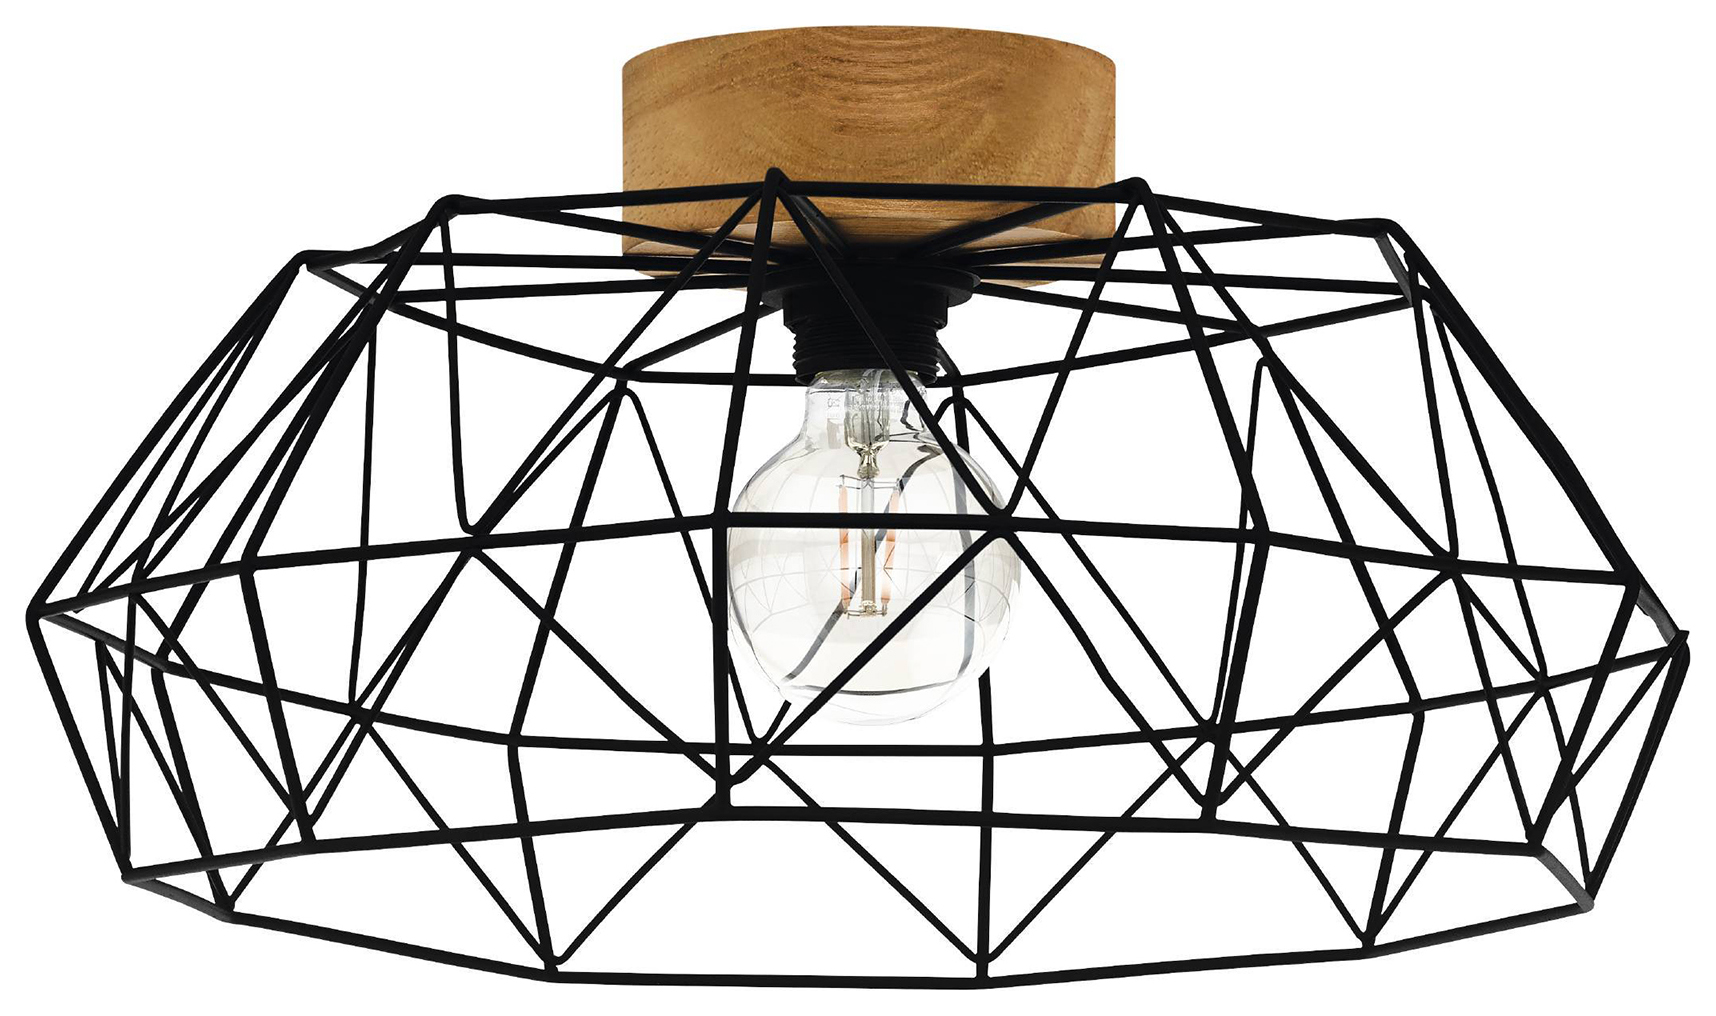 Eglo Padstow 1-Light Industrial Ceiling Light with Wooden Detailing - Black